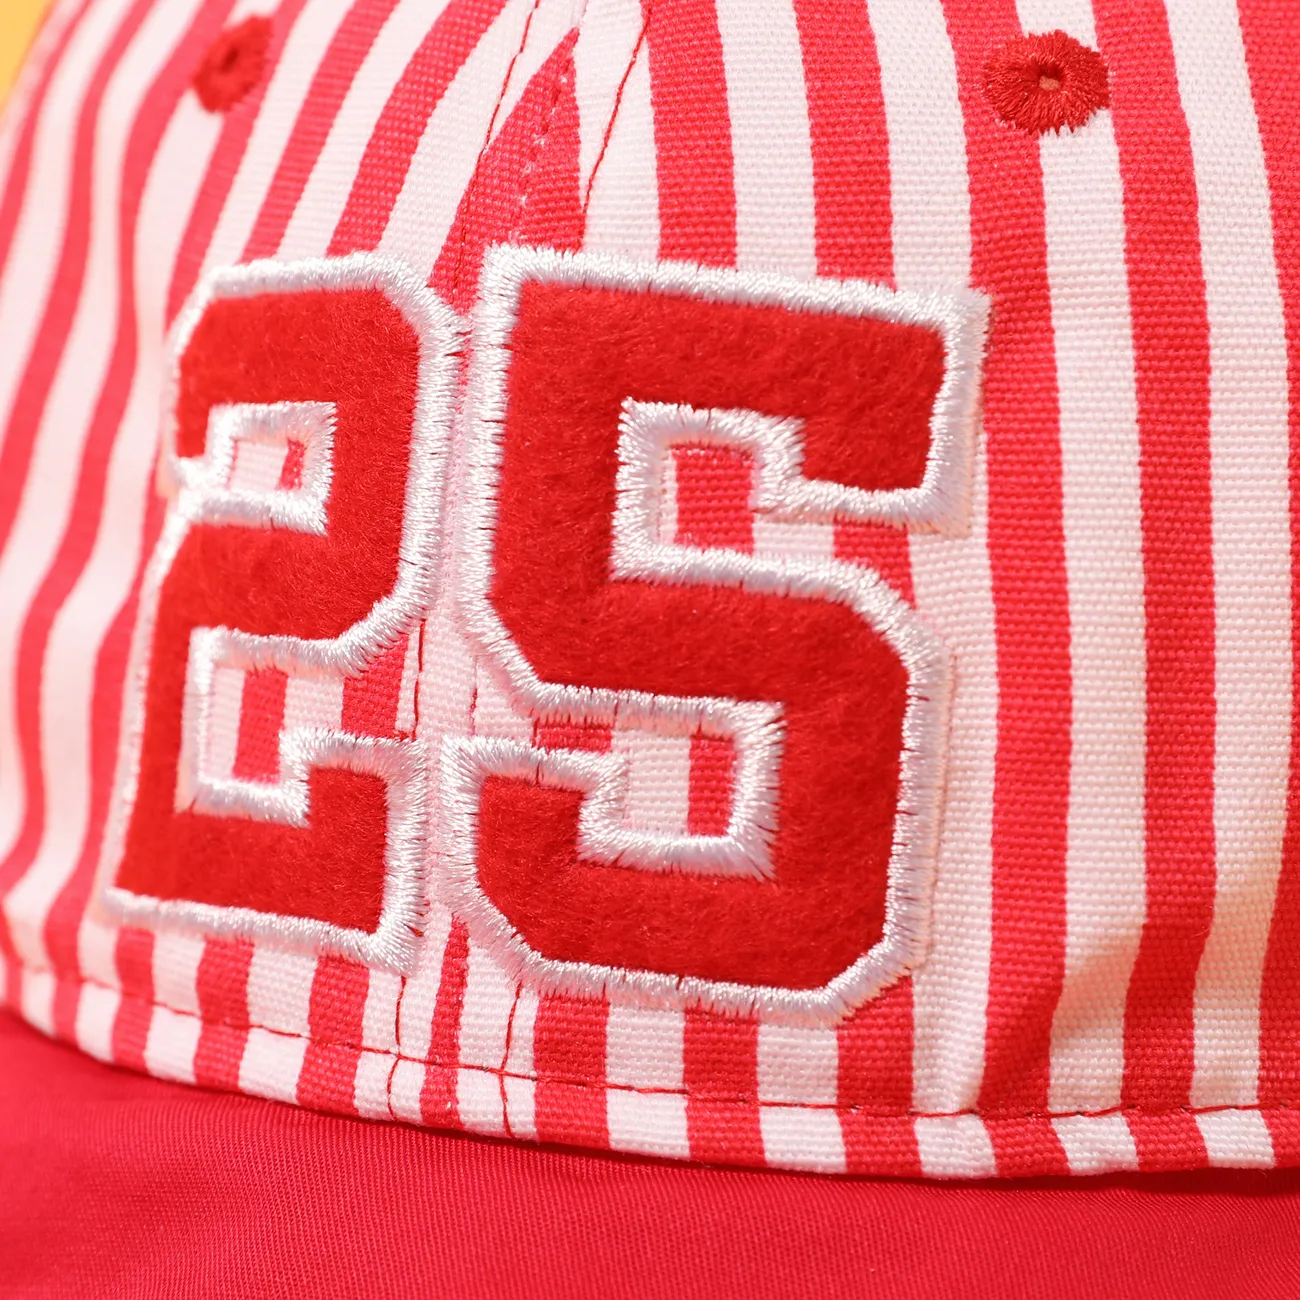 Toddler Baseball Cap with Sun Protection and Digital Striped Design Red big image 1